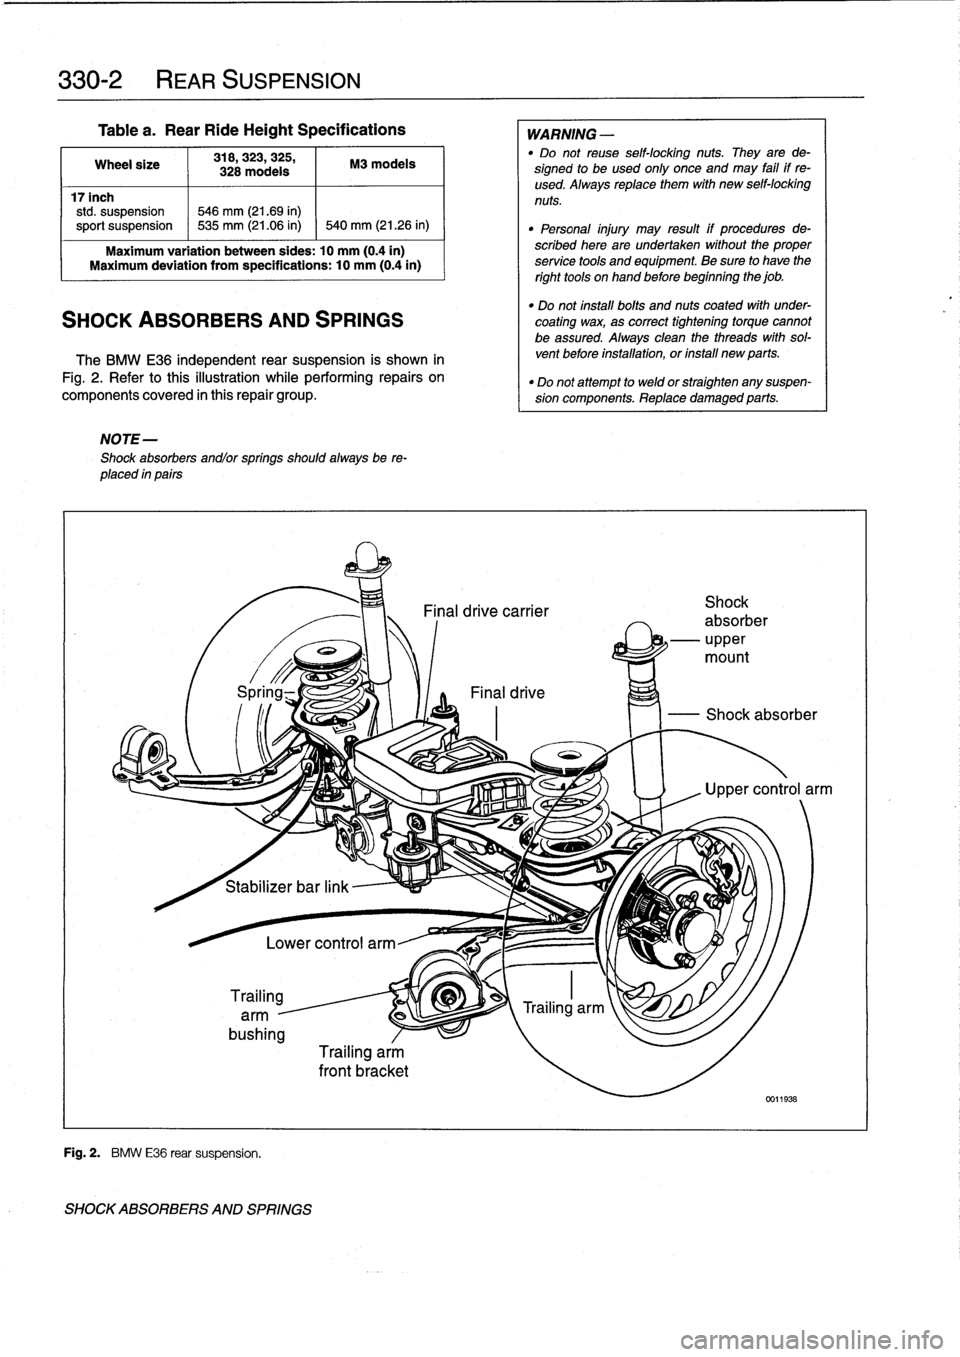 BMW 318i 1997 E36 Service Manual 
330-2

	

REAR
SUSPENSION

Table
a
.
Rear
RideHeight
Specifications

Wheel
size

	

318,323,
325,

	

M3
modeis
328
modeis

17inch
std
.
suspension

	

546
mm
(21.69
in)
sport
suspension

	

~
535
mm